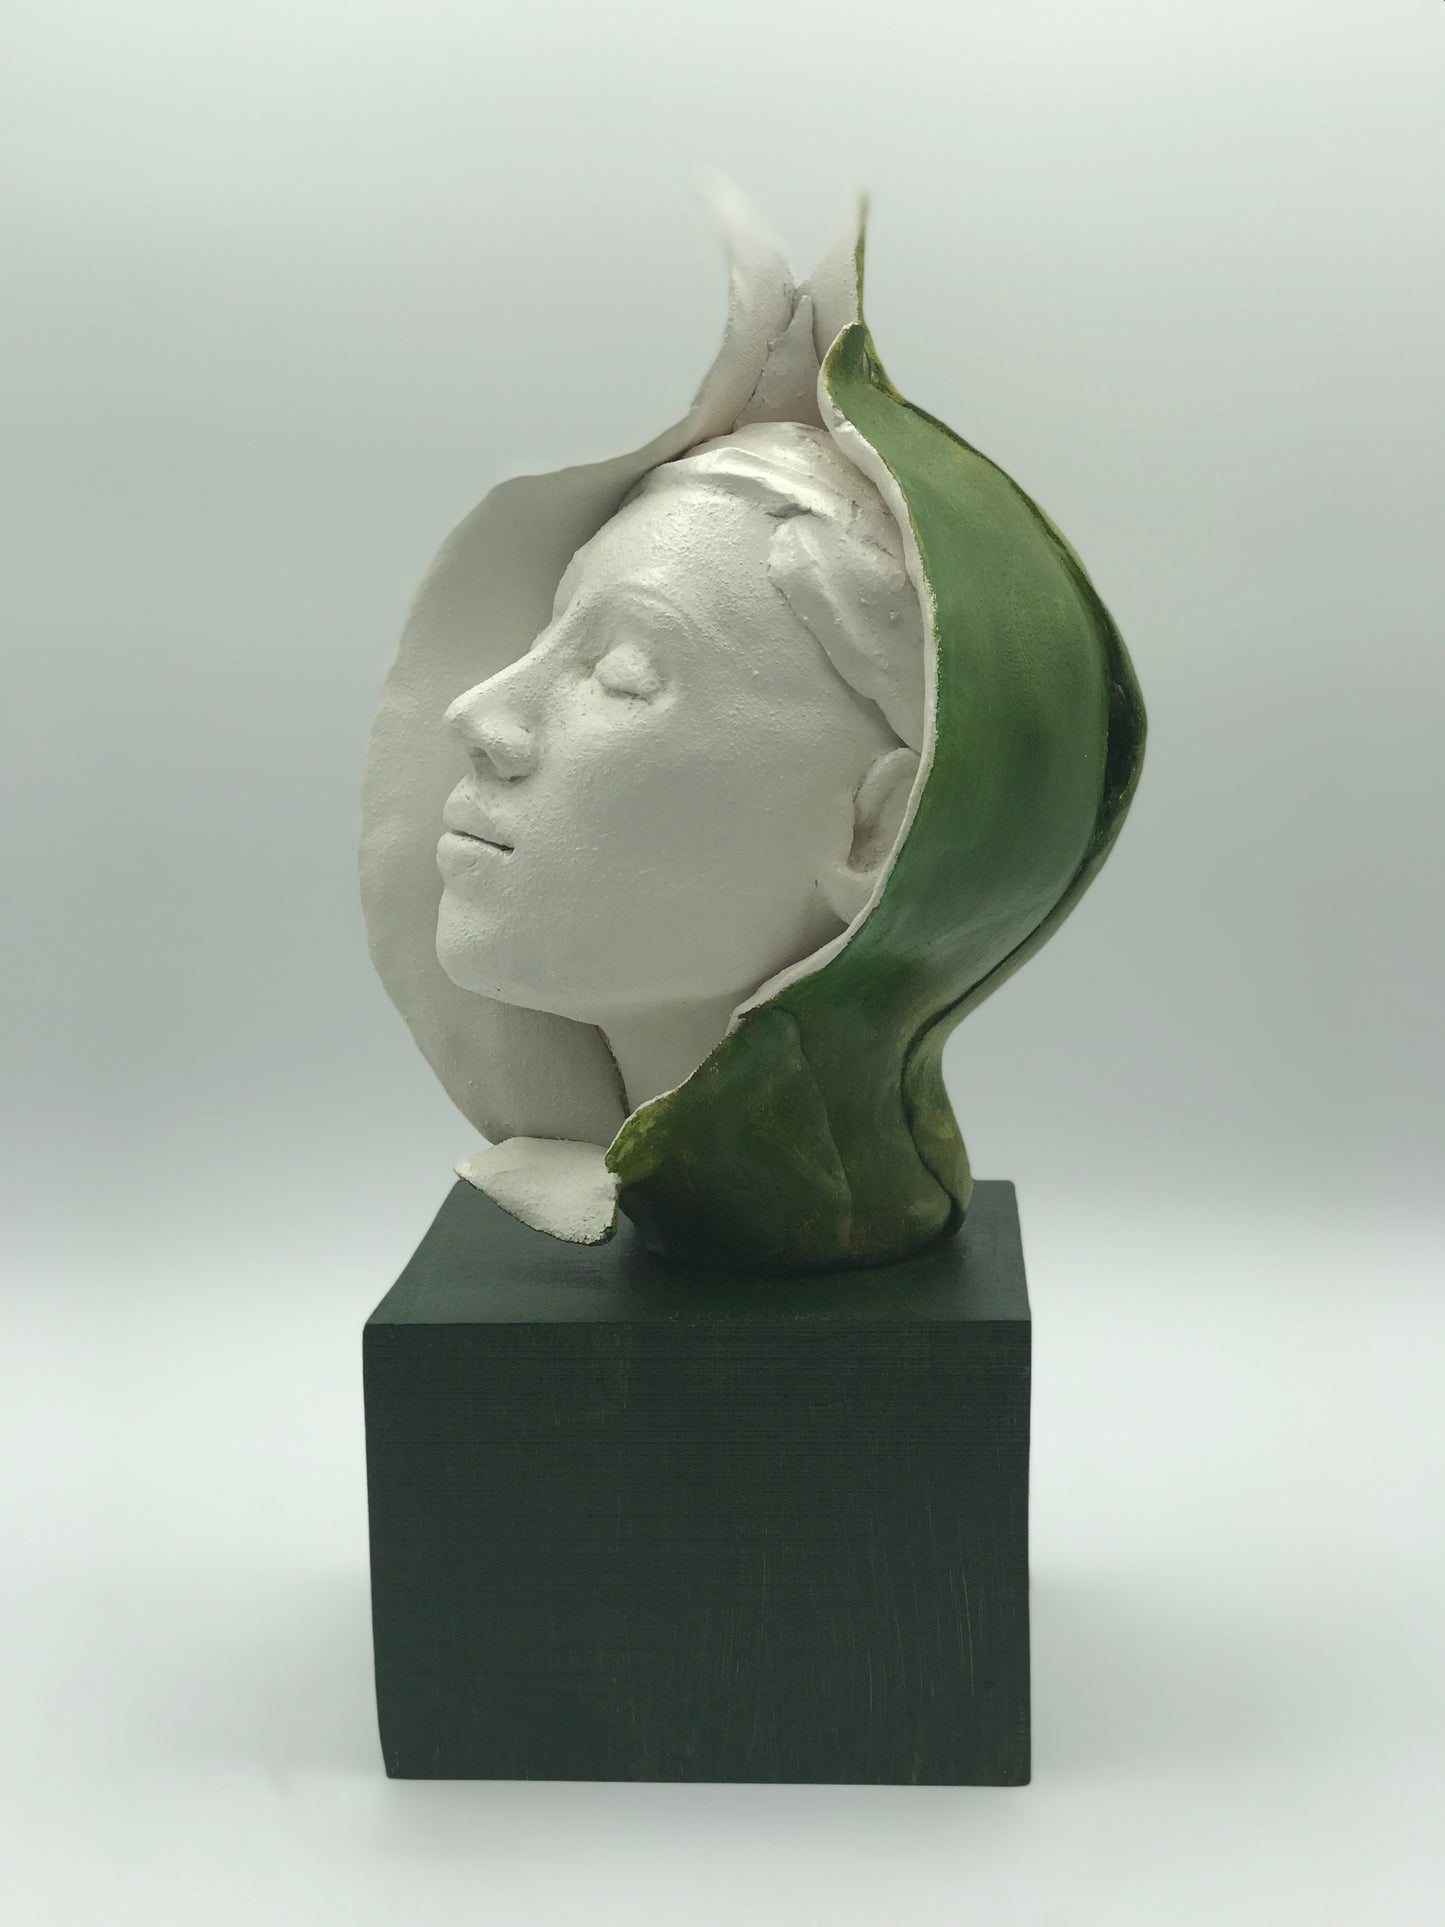 Clay sculpture of woman's head emerging from green bud. Eyes closed, peaceful expression.